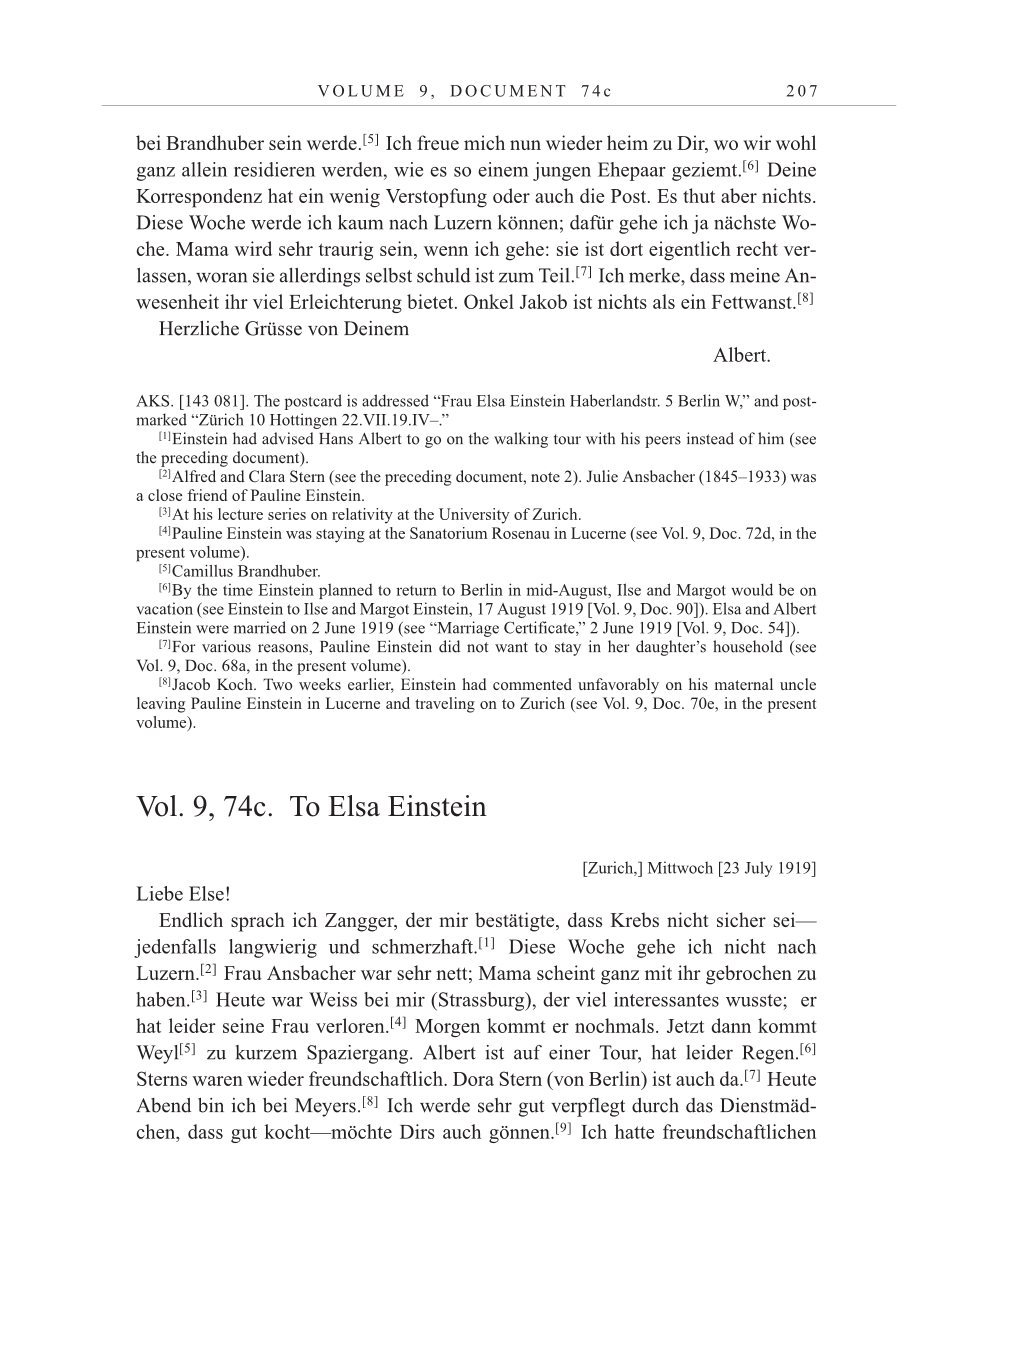 Volume 10: The Berlin Years: Correspondence May-December 1920 / Supplementary Correspondence 1909-1920 page 207